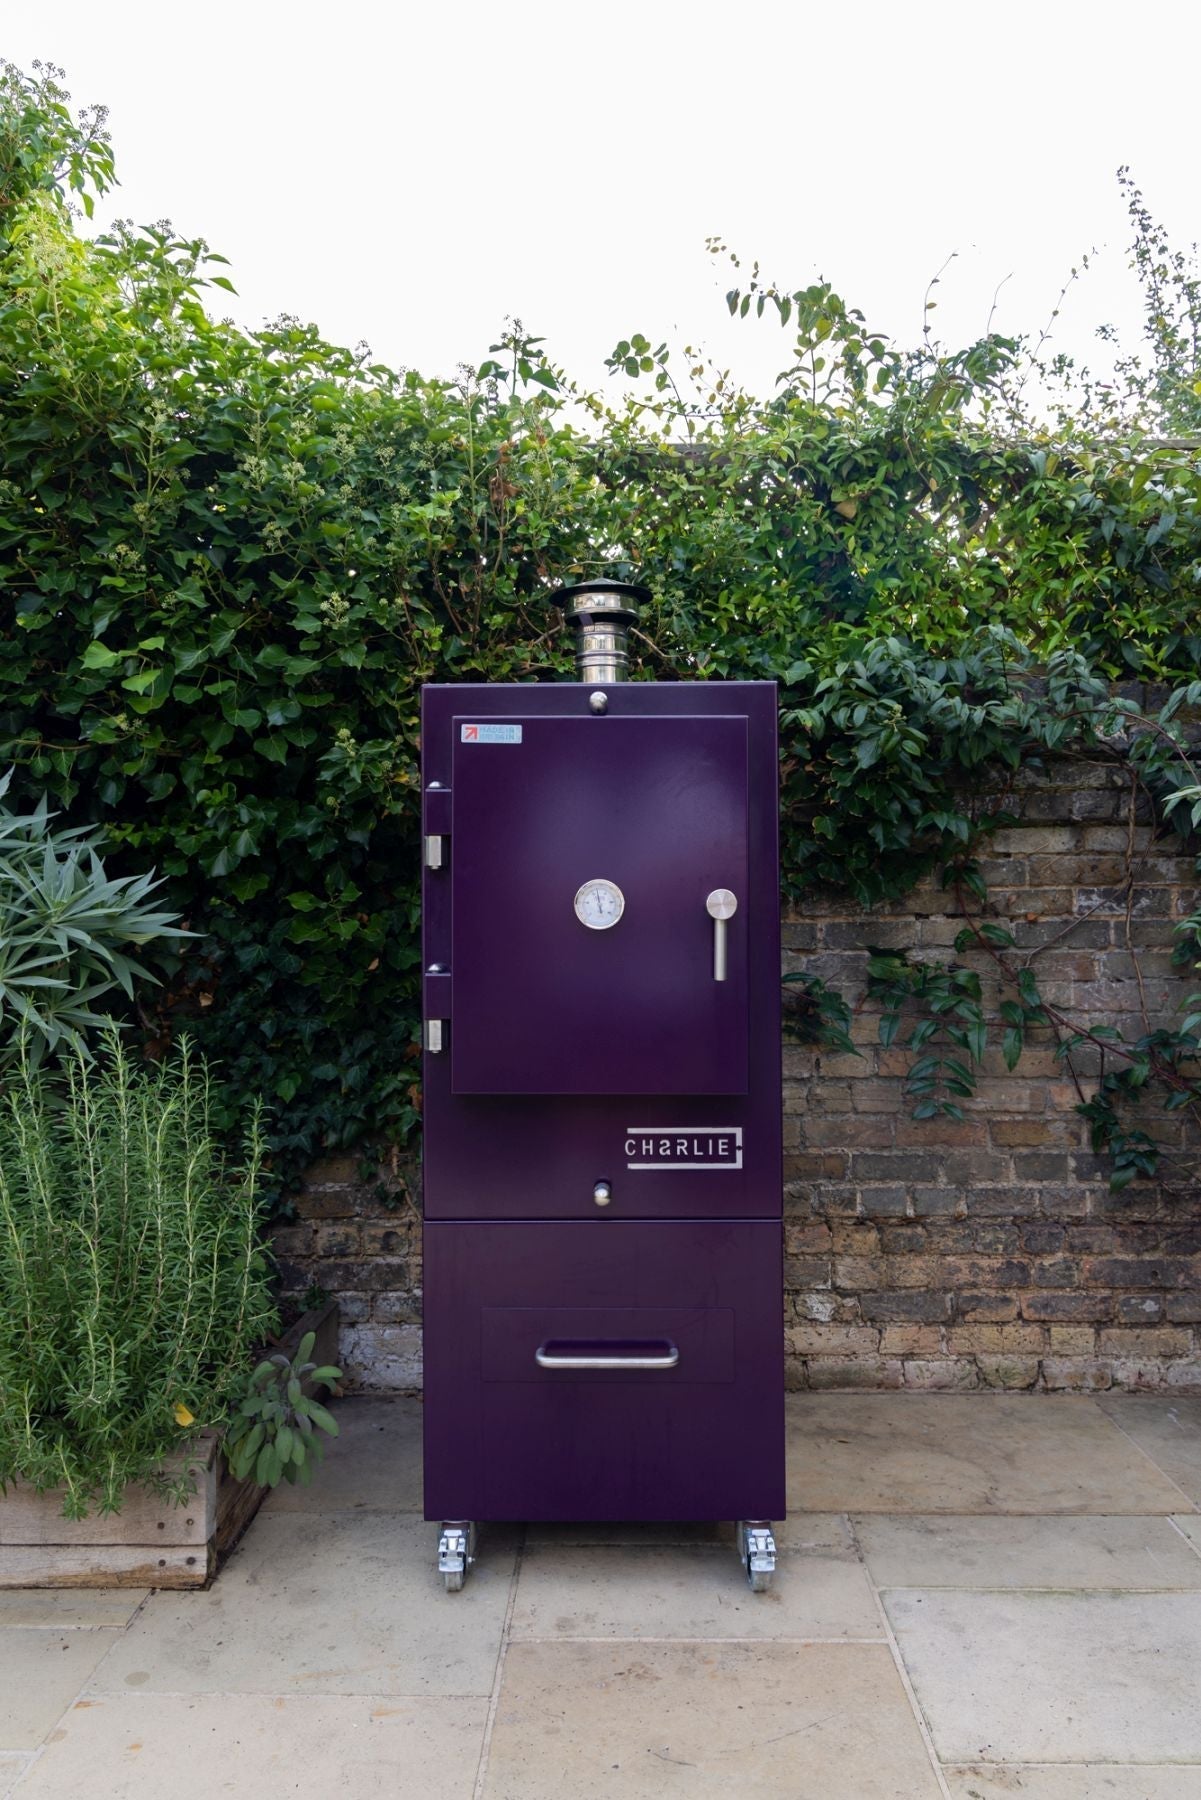 Charlie Charcoal Oven - Honeycomb